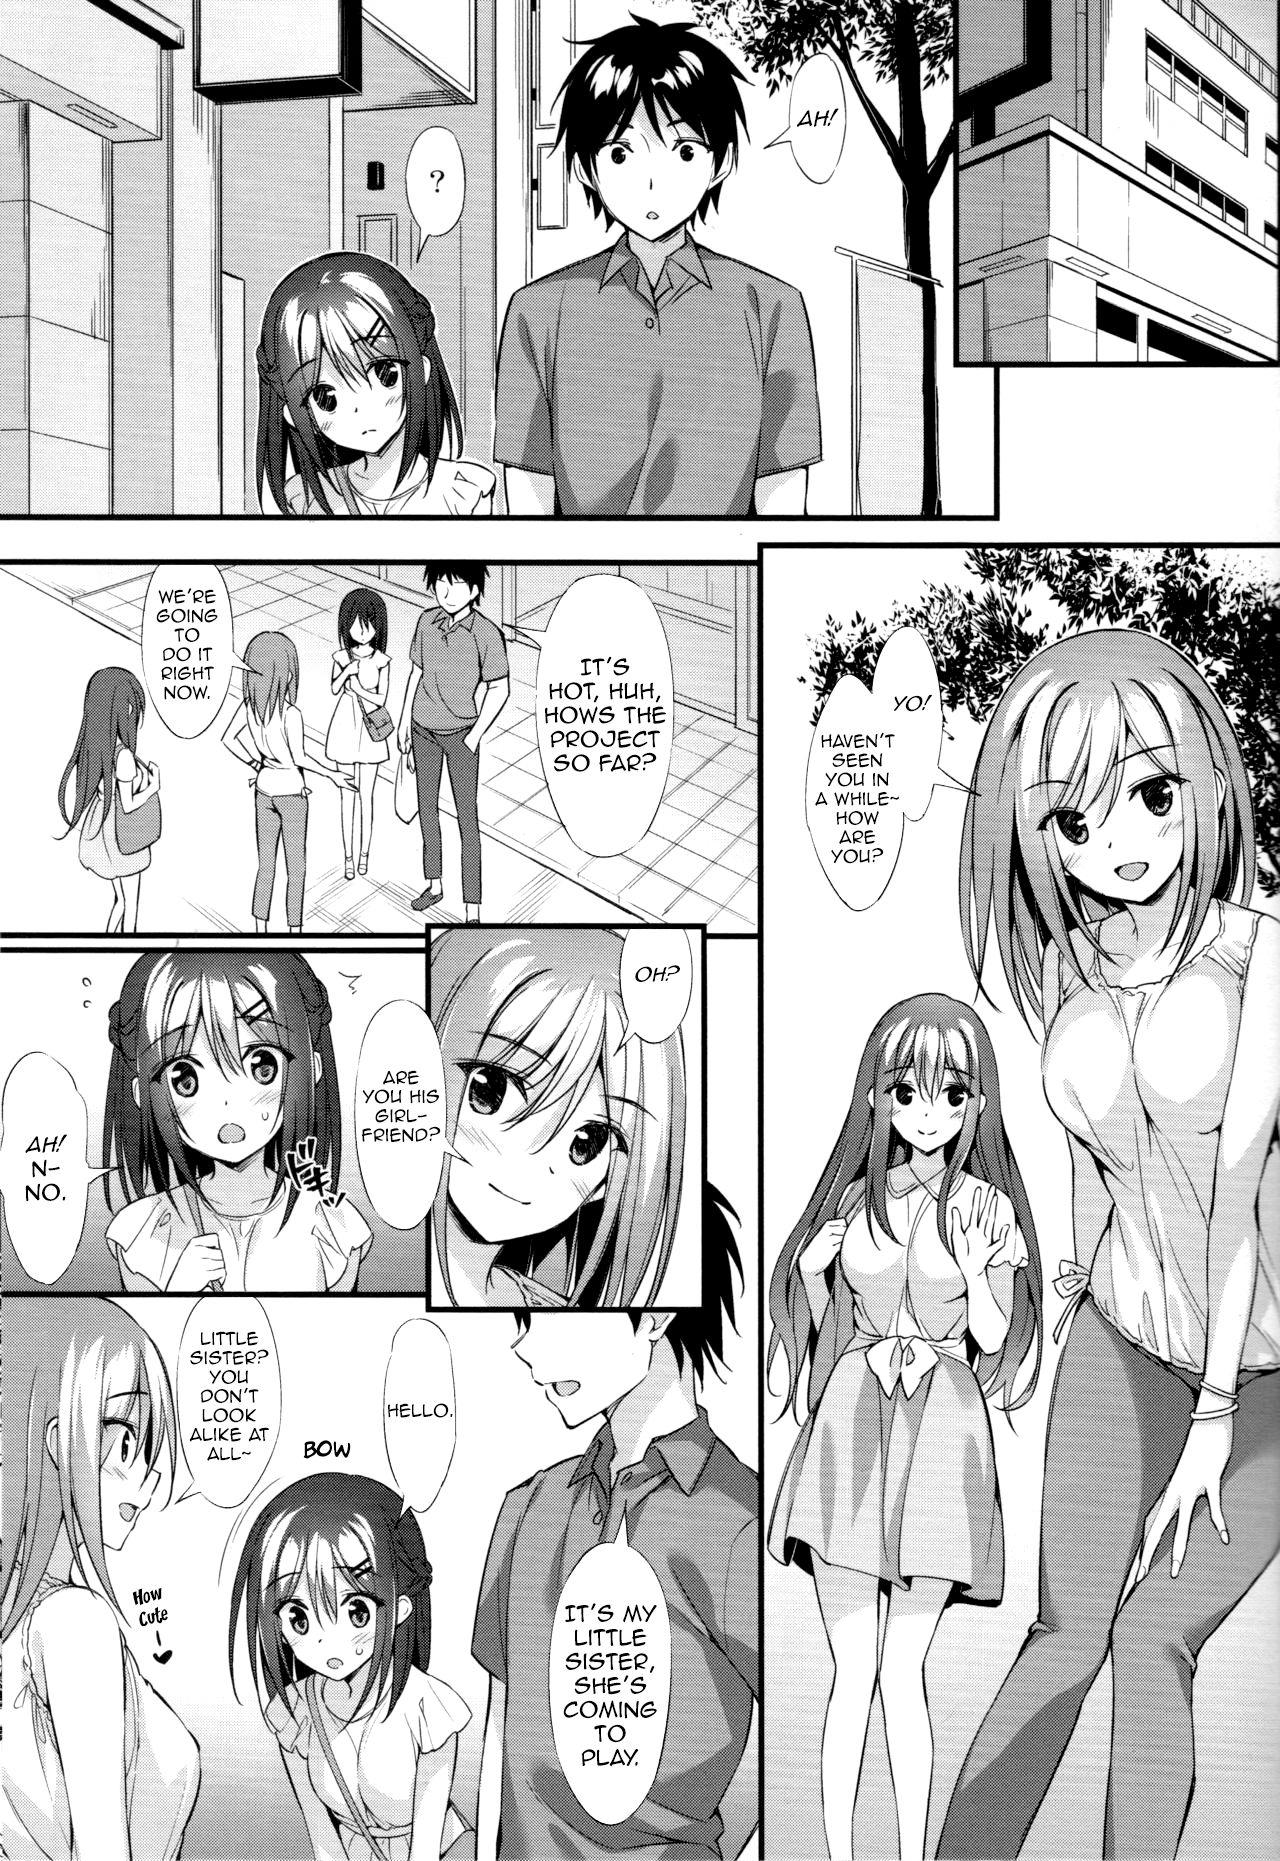 Shecock (COMIC1☆13) [P:P (Oryou)] Onii-chan, Hitorijime Shitai no...! | I want you all for myself Onii-chan...! [English] [Comfy Pillow Scans] - Original Porn Sluts - Page 2